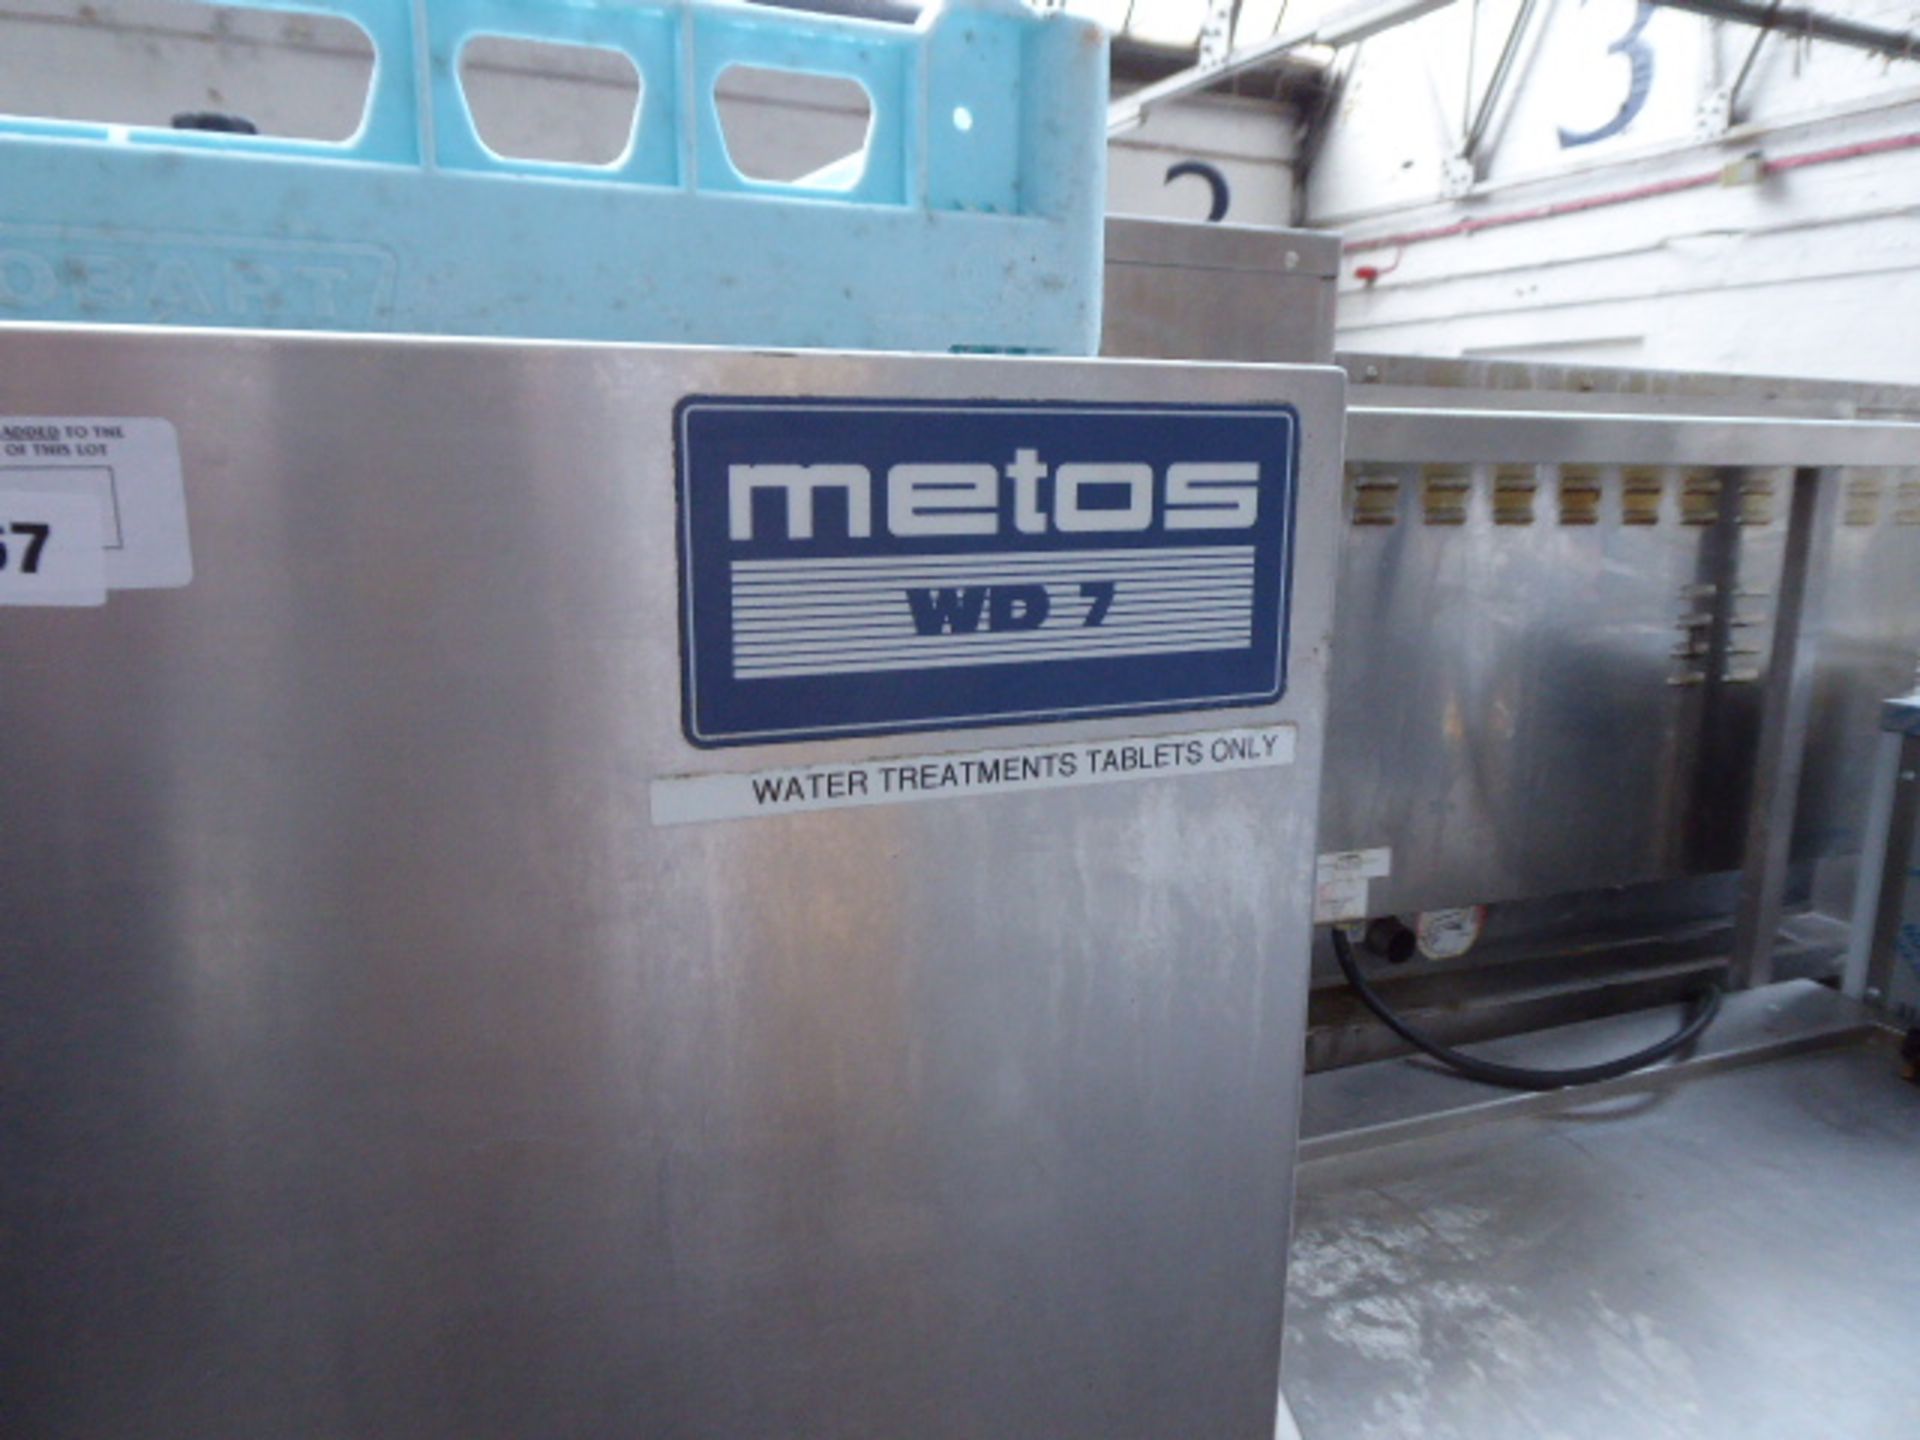 65cm Metos WD7 lift top pass through dishwasher with draining board - Image 2 of 4